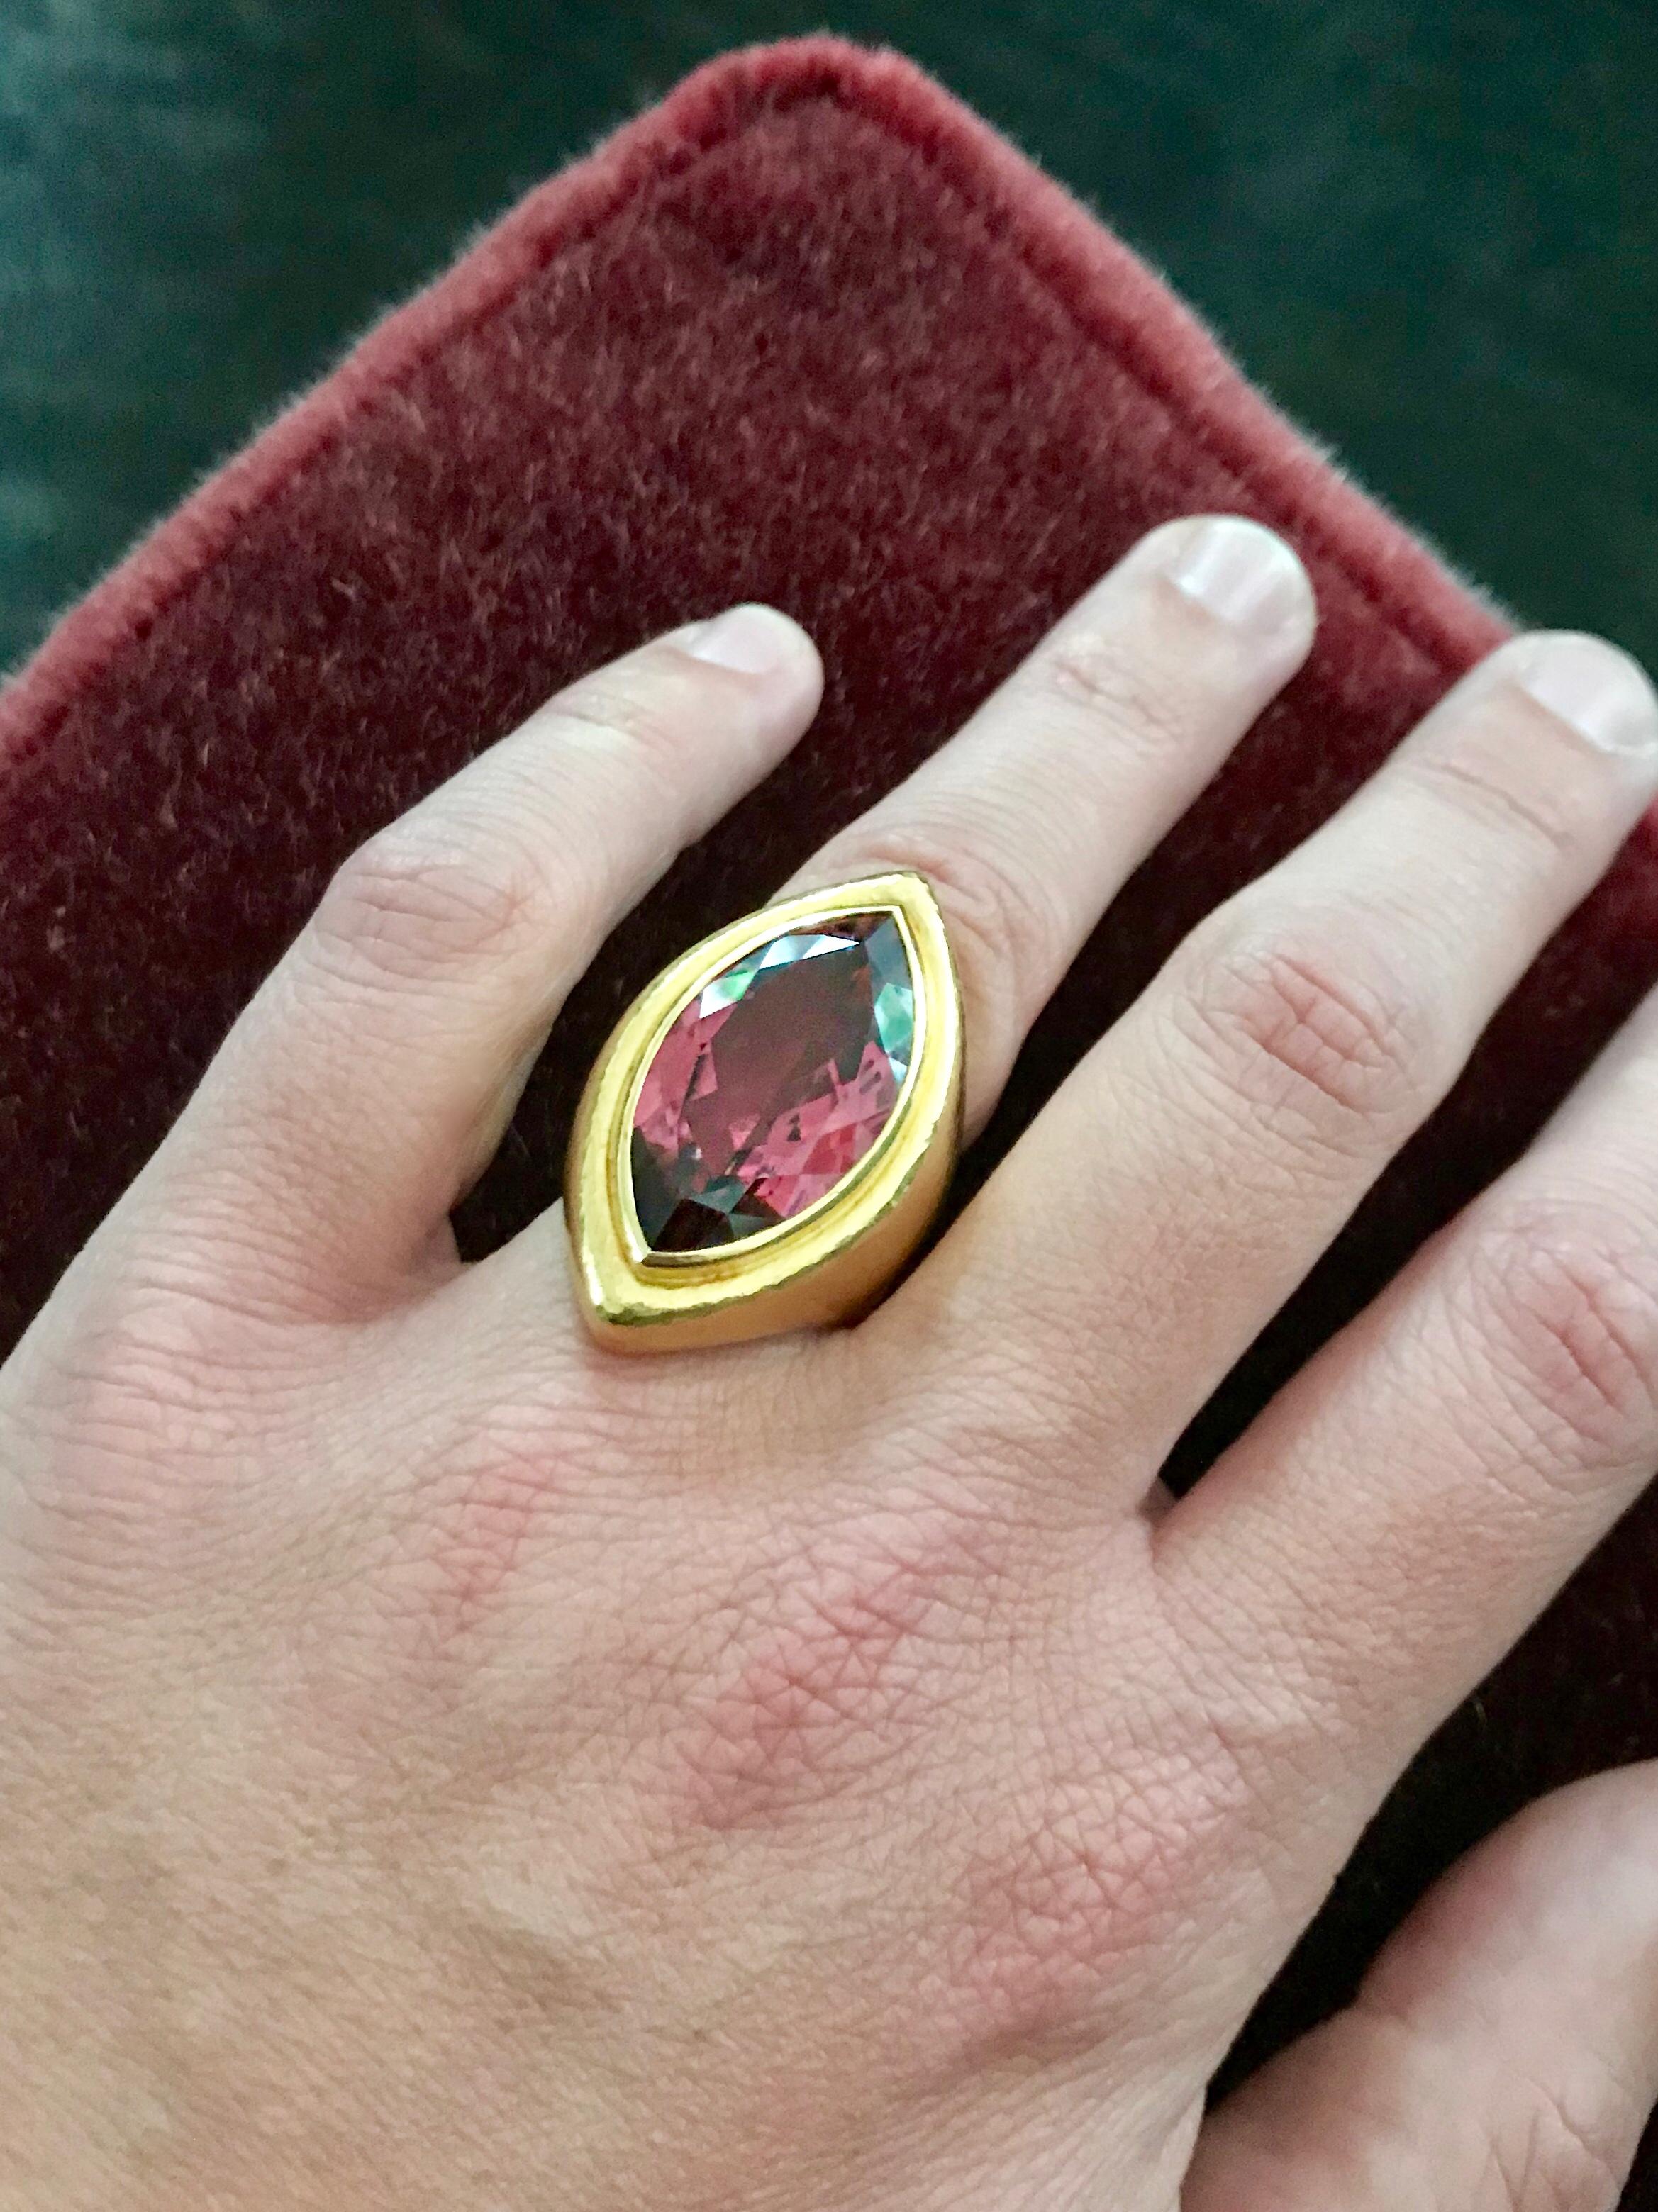 Extraordinary 22k hammered yellow gold ring with a beautiful pink tourmaline (rubellite) 20.09 ct.
Dimensions: 37 mm x 21 mm
Ring size: 56